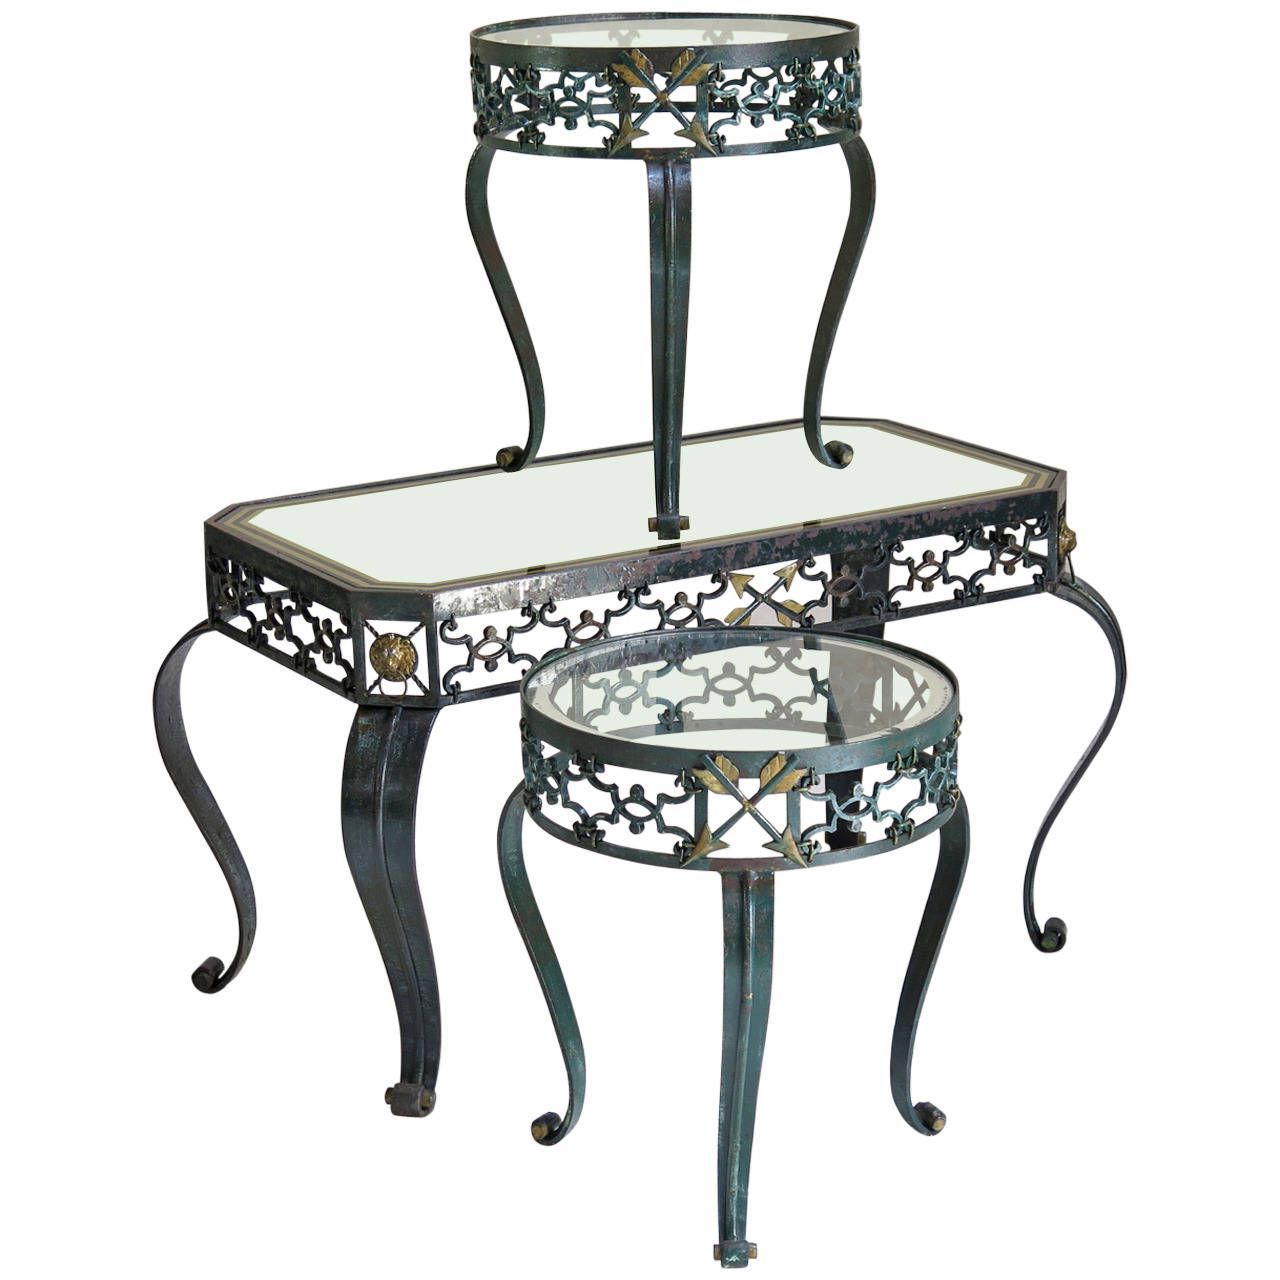 Trio Of Art Deco Wrought Iron Coffee Tables, France, 1940s Intended For Well Known Wrought Iron Cocktail Tables (View 4 of 20)